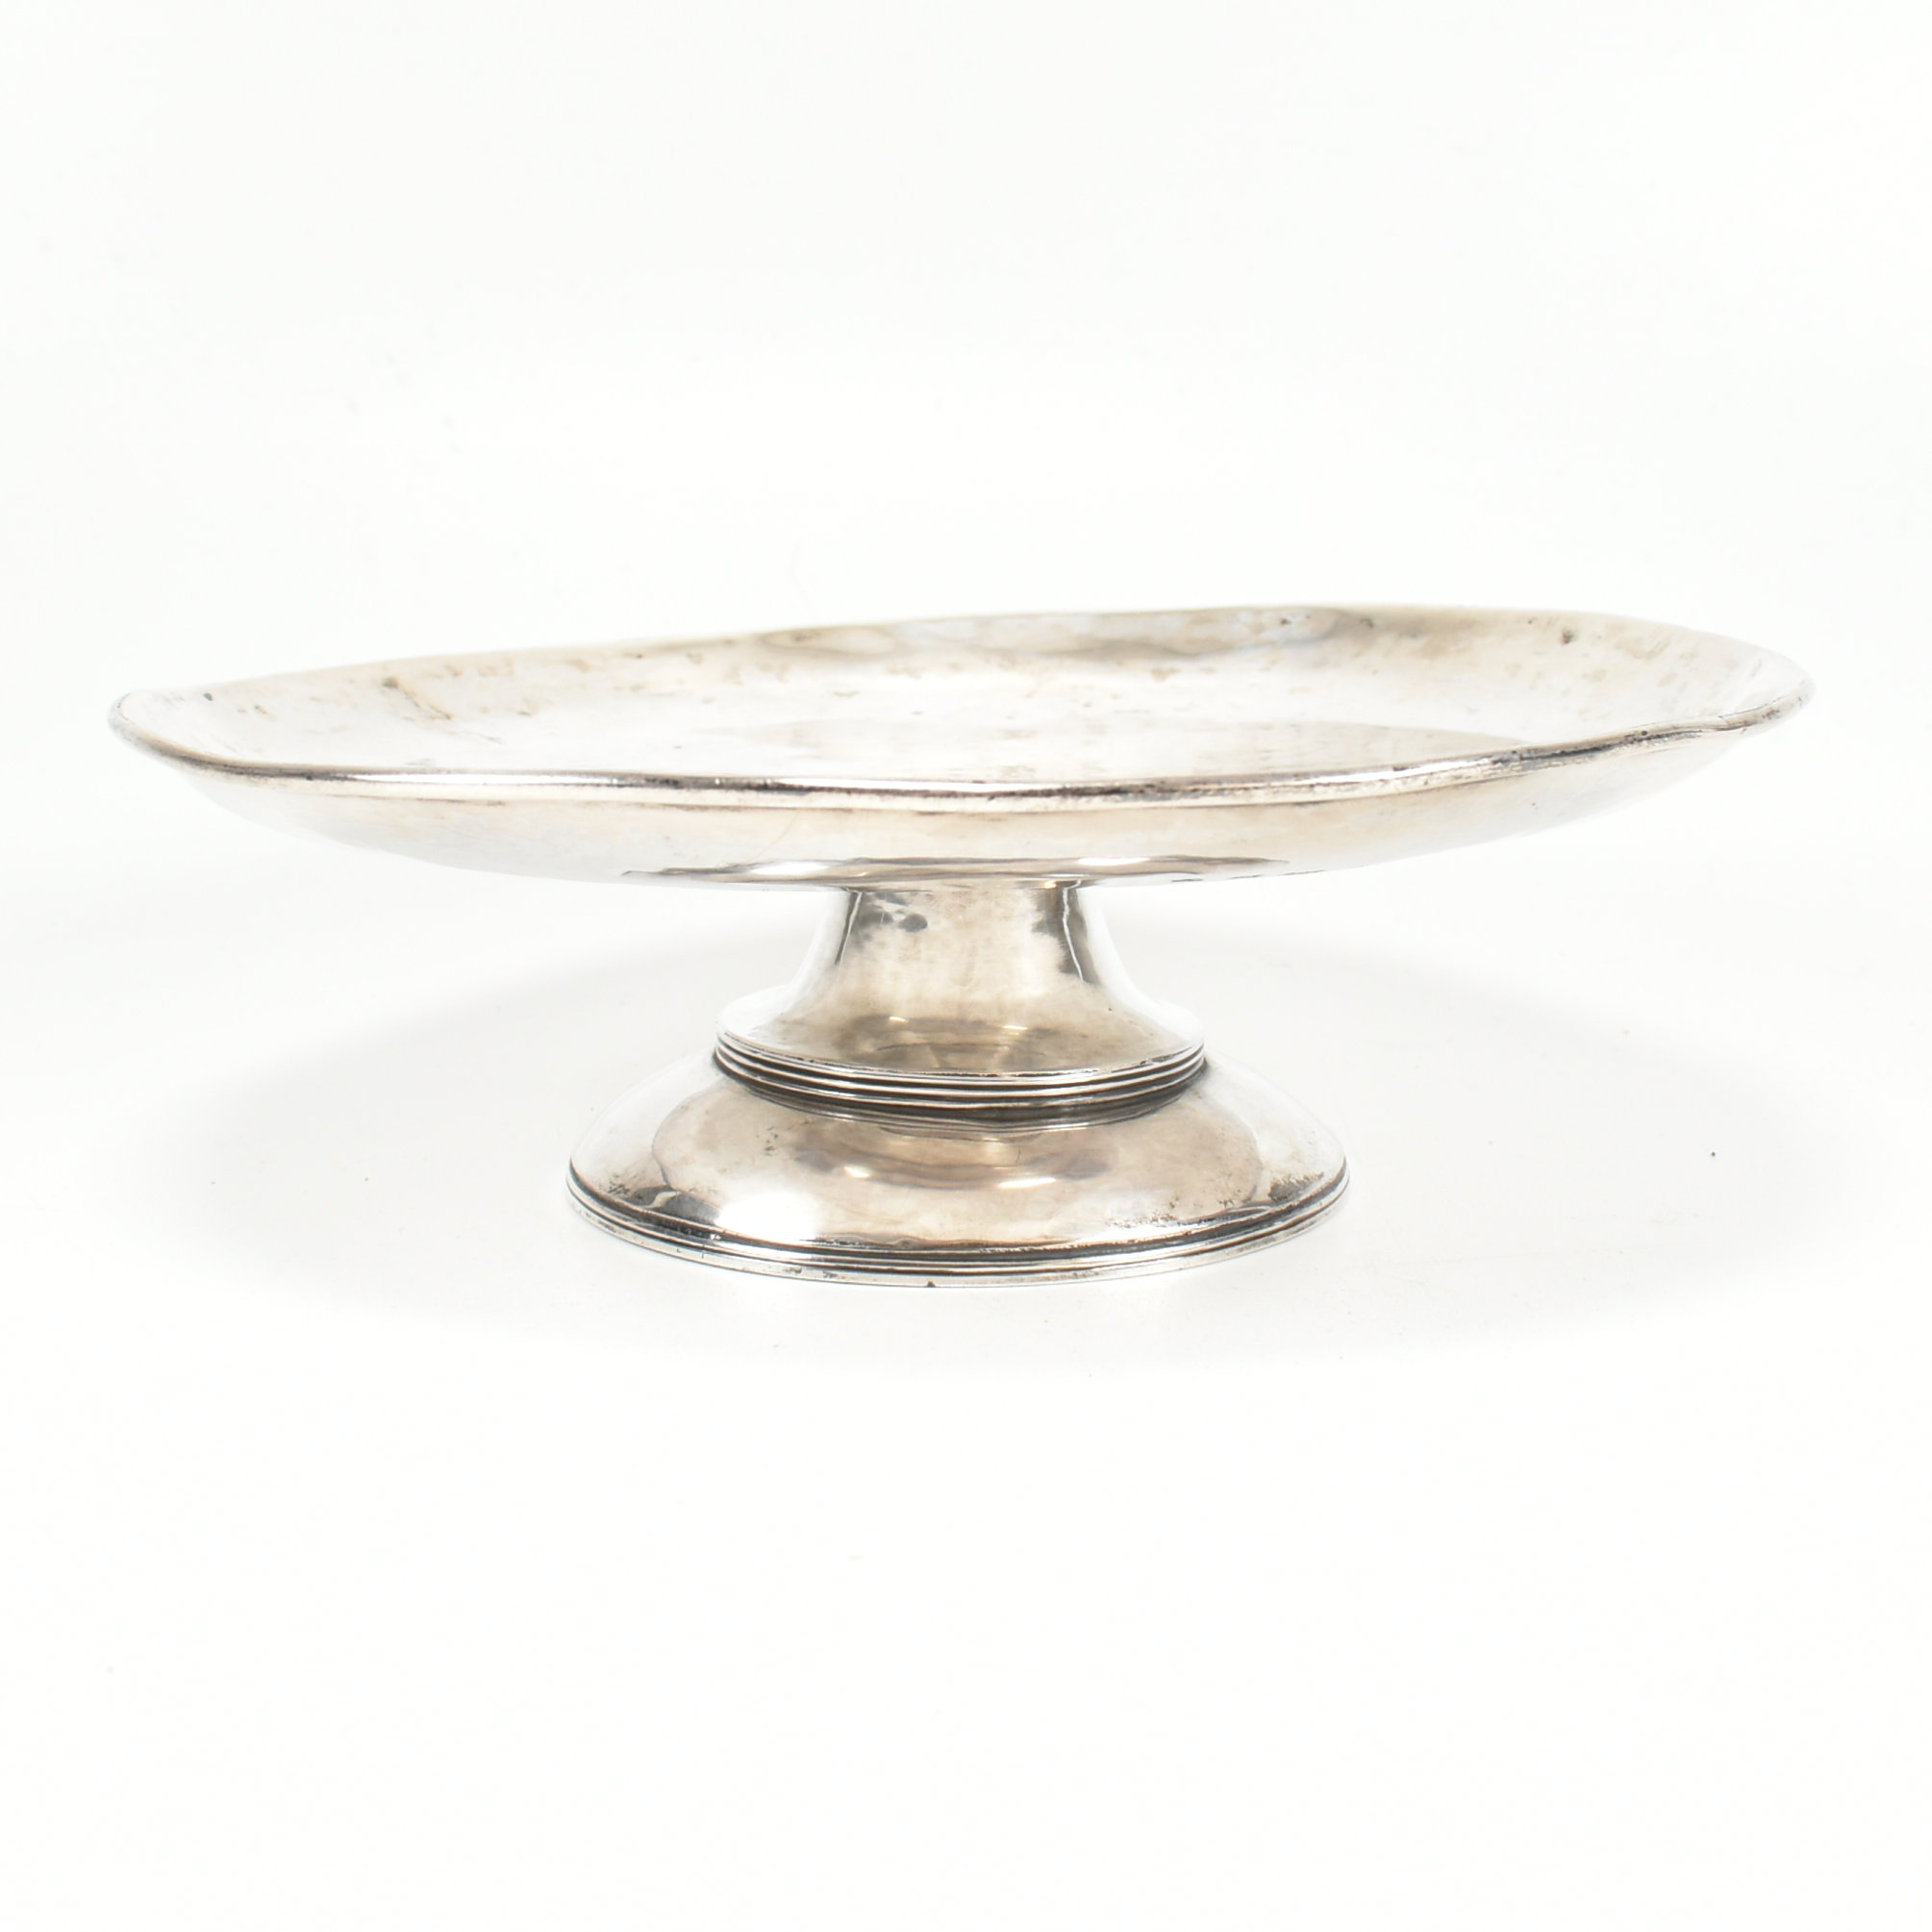 1960 ARTS & CRAFTS STYLE HALLMARKED SILVER COMPOTE - Image 3 of 6